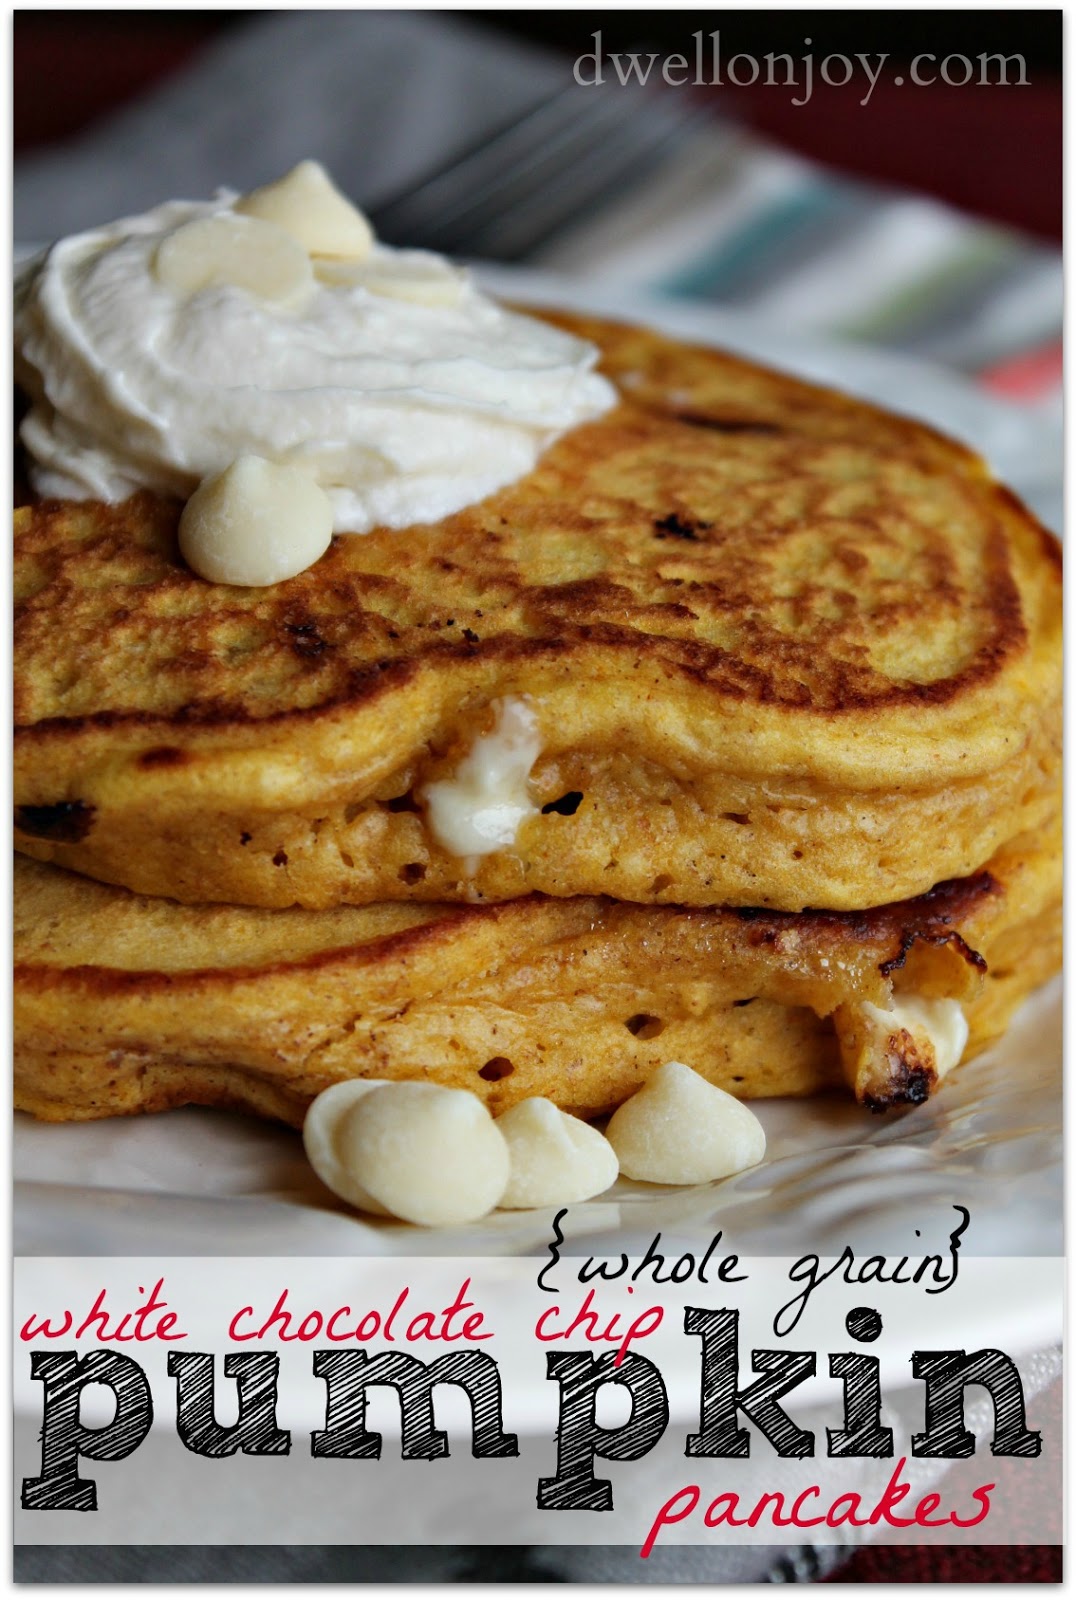 to from  Grain} White make Joy: scratch pancakes Pancakes {Whole grain Chocolate Chip whole how on Dwell Pumpkin